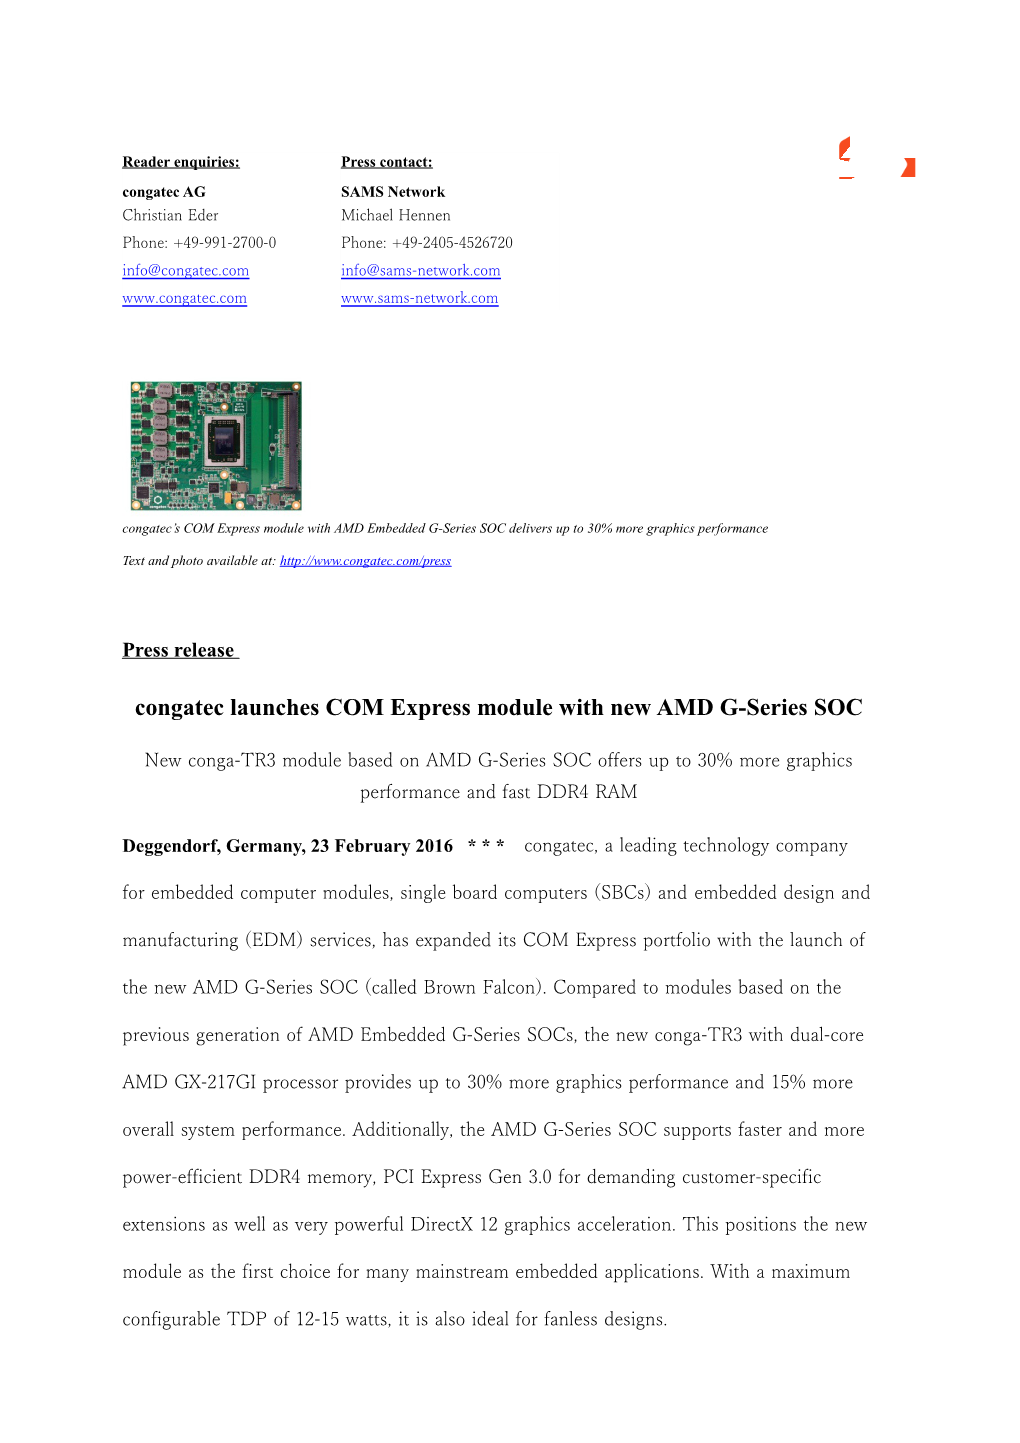 Congateclaunches COM Express Module with New AMD G-Series SOC